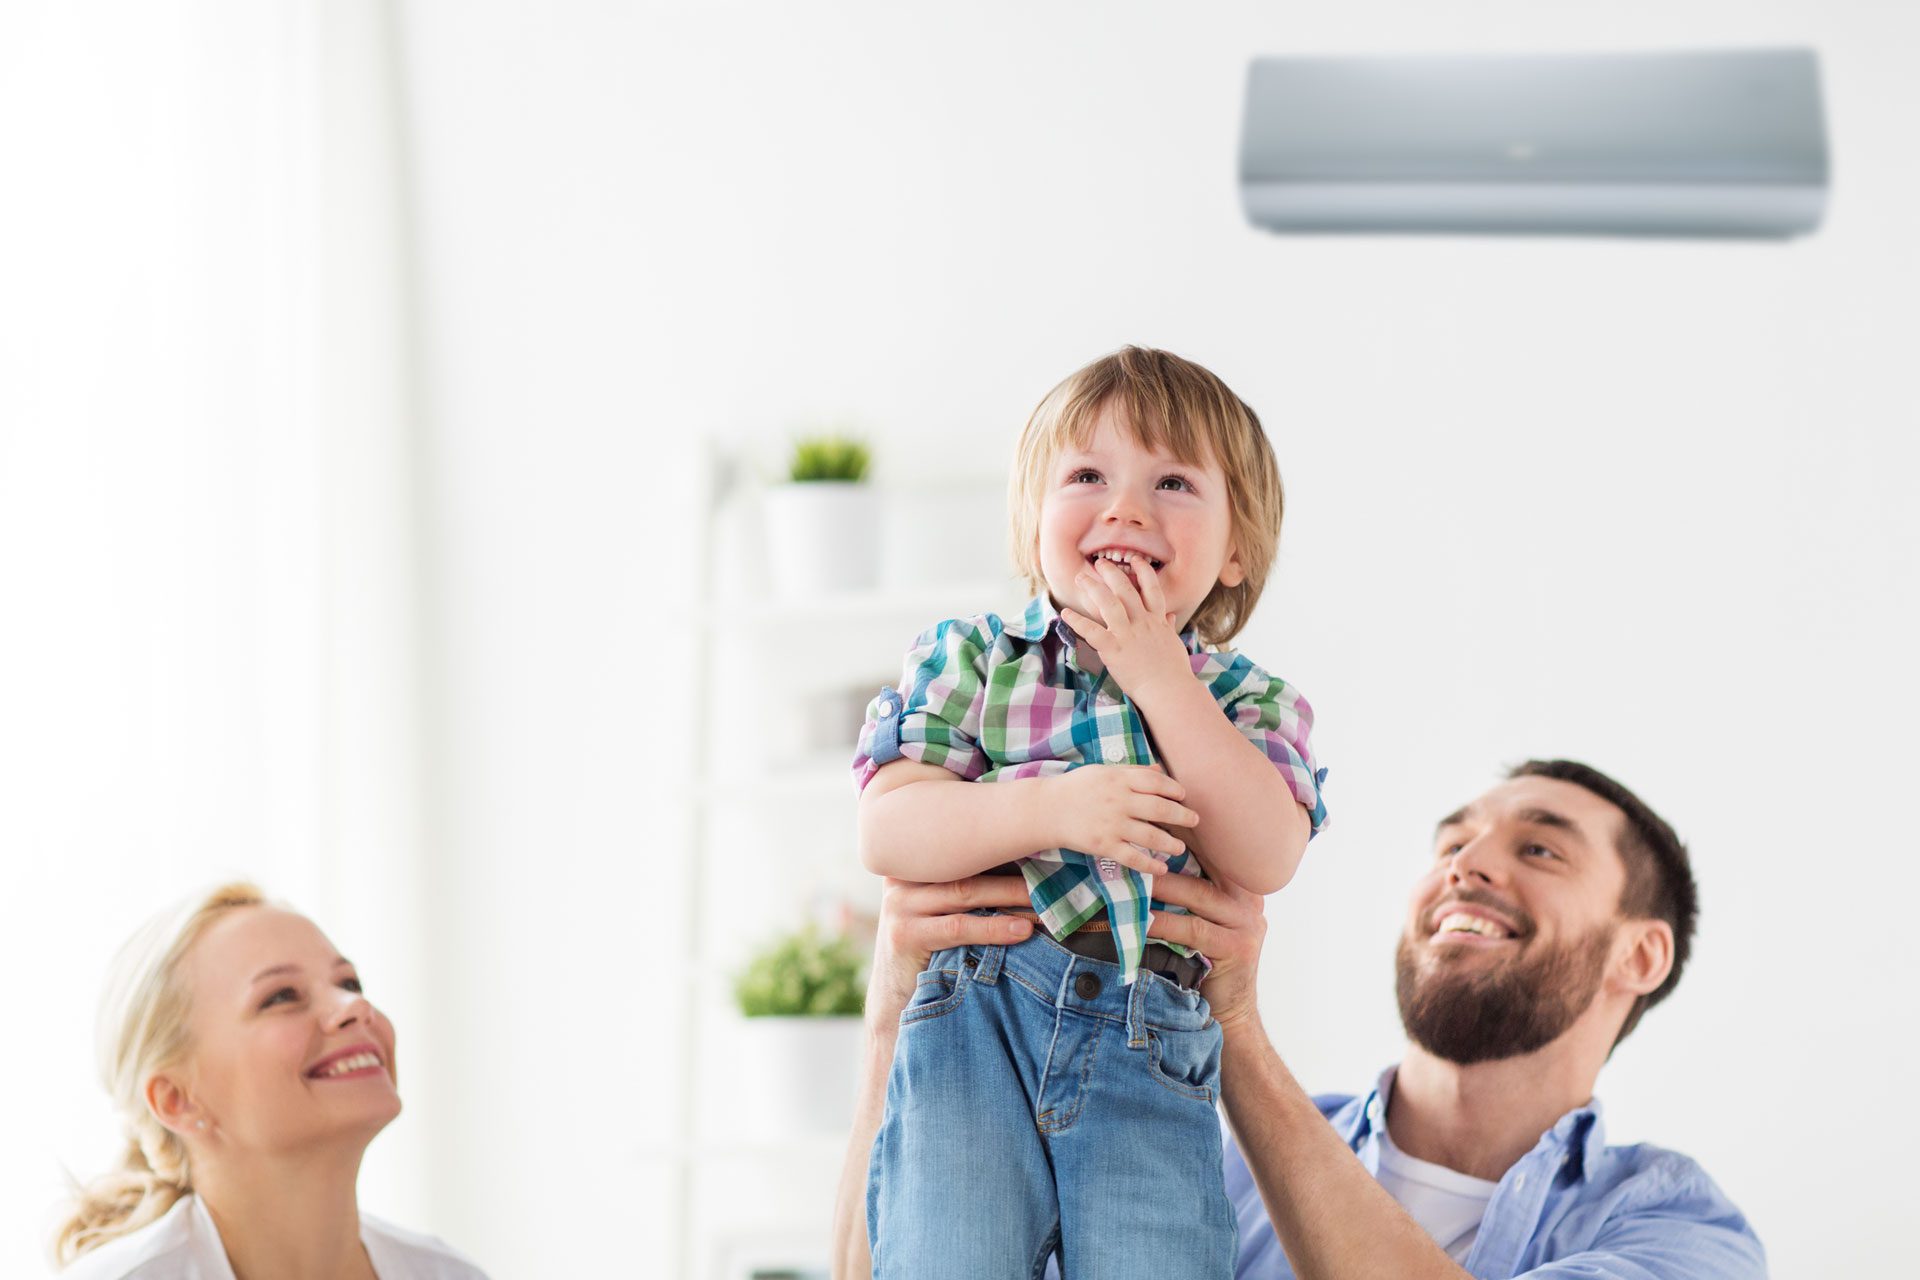 Cost of Bryant Ductless HVAC in Allentown, PA